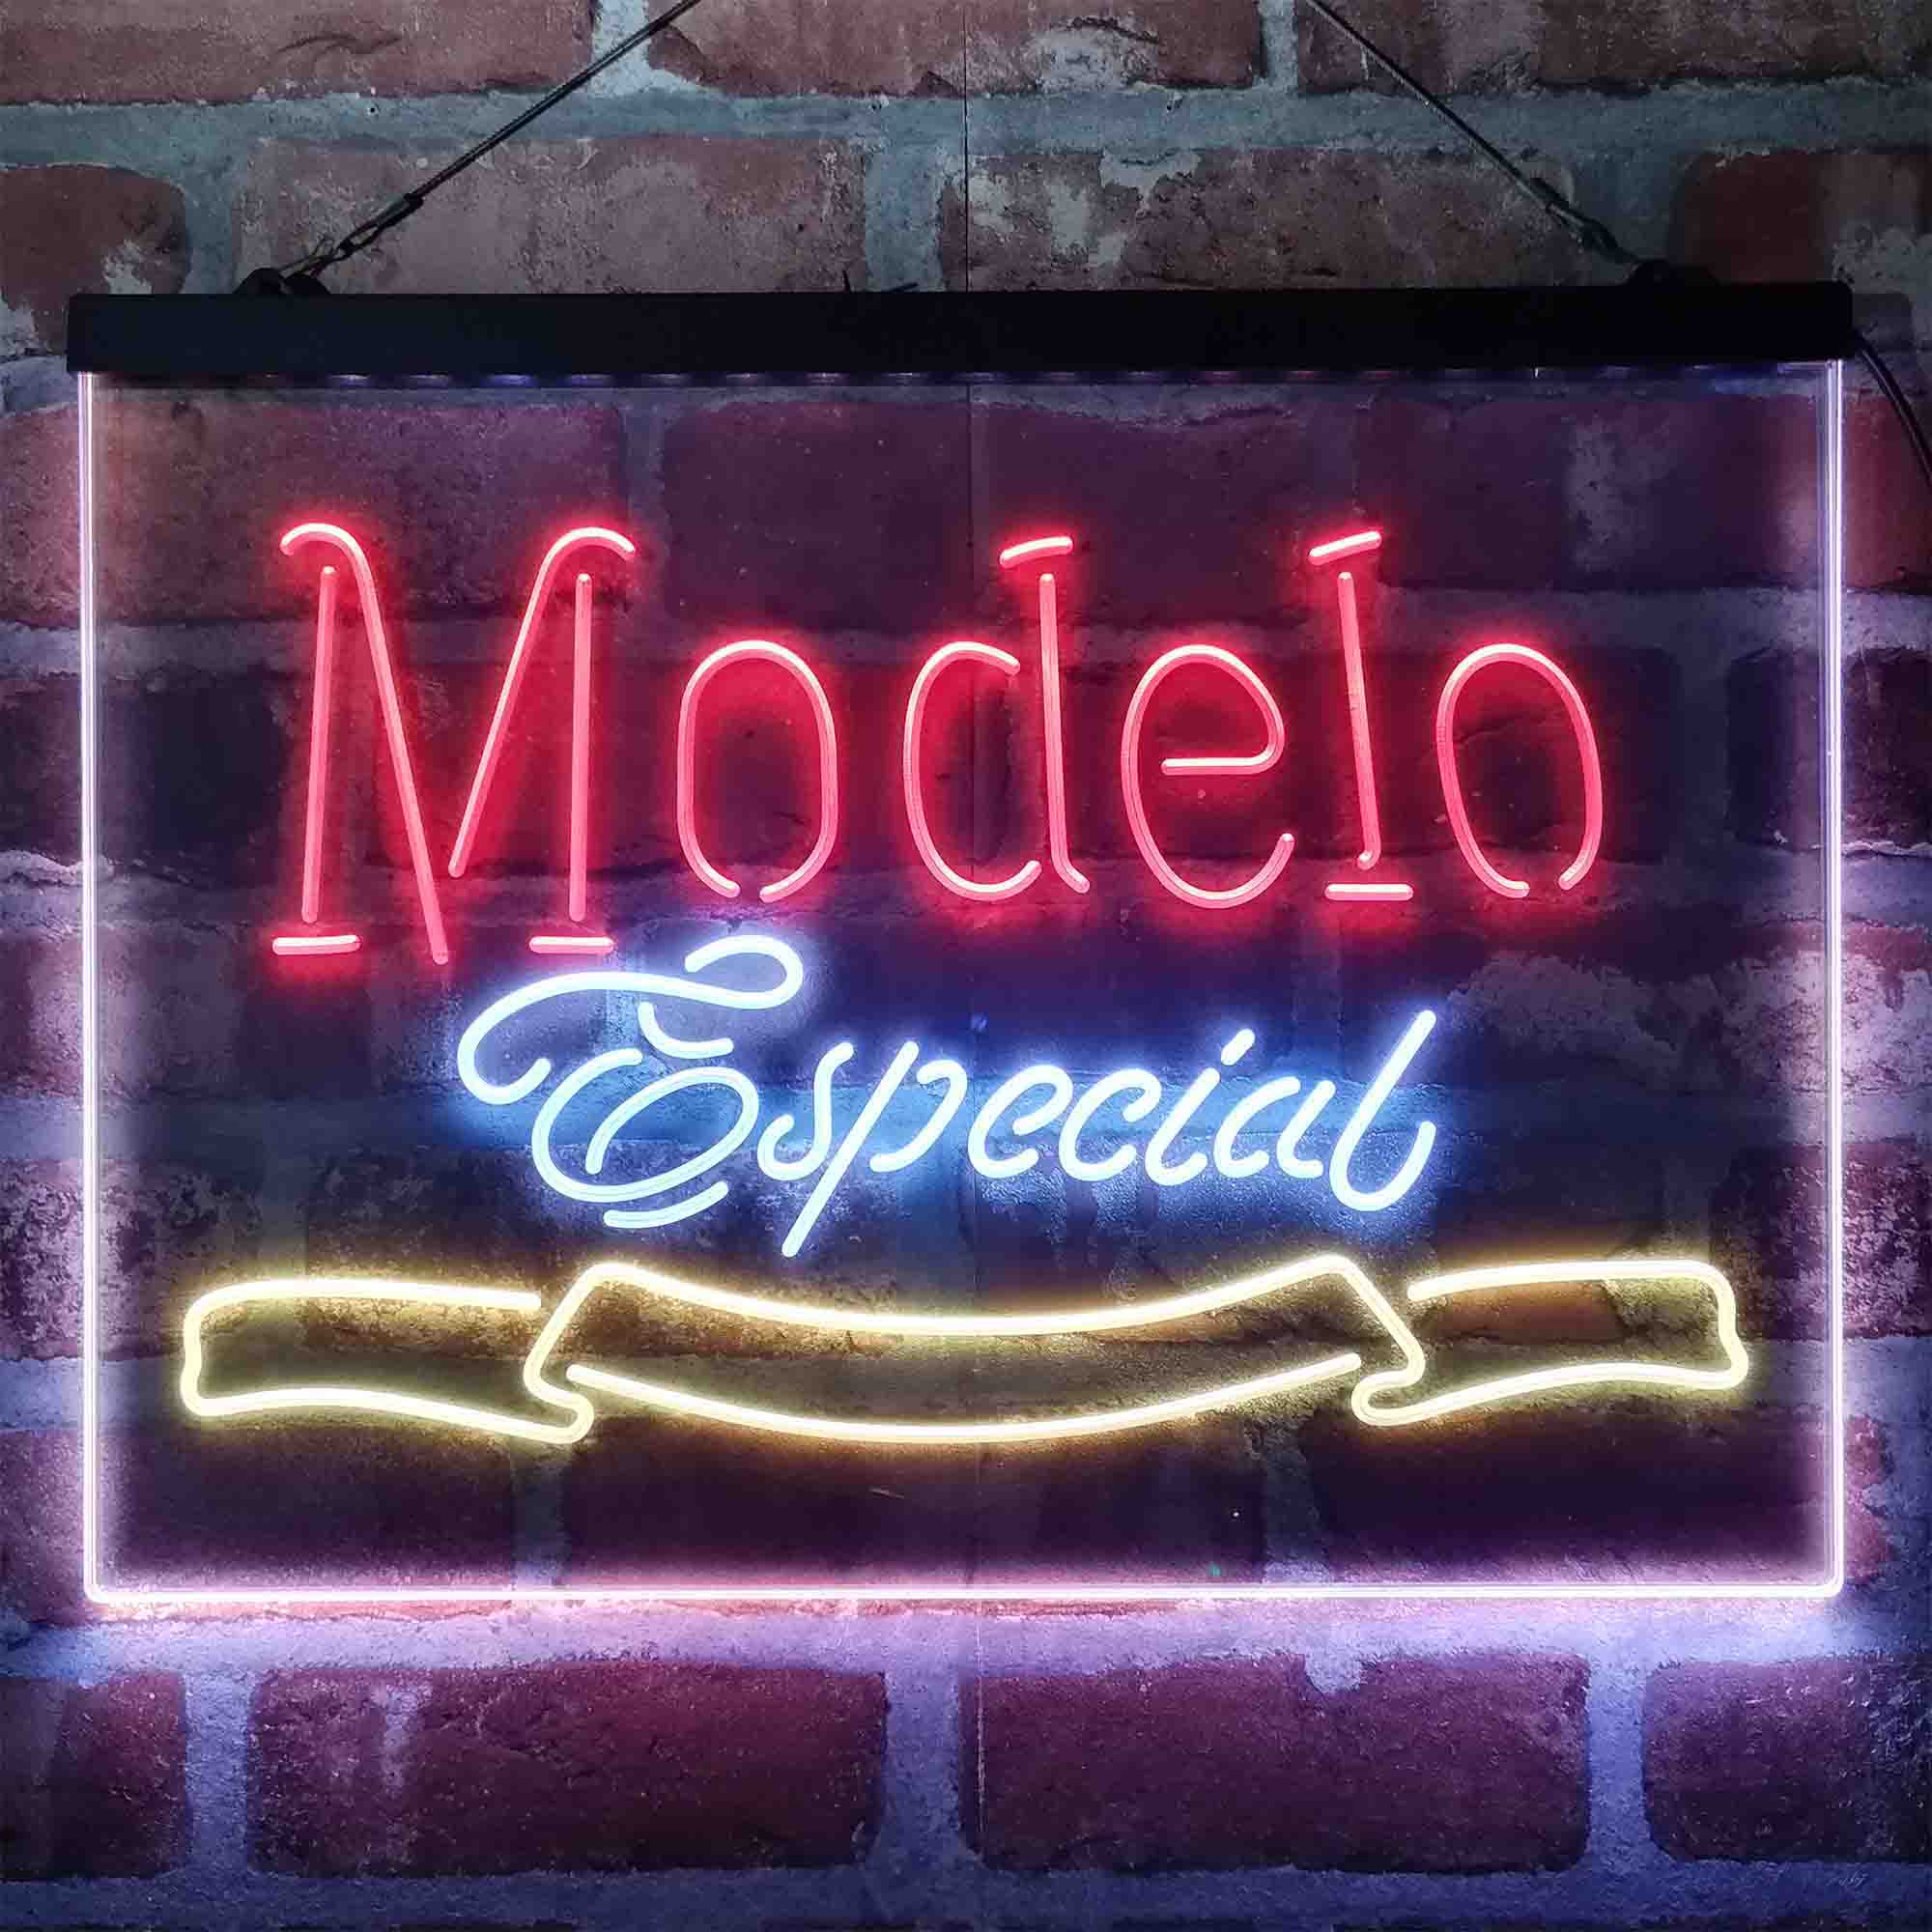 Modelo Especial Beer Bar Neon 3-Color LED Sign